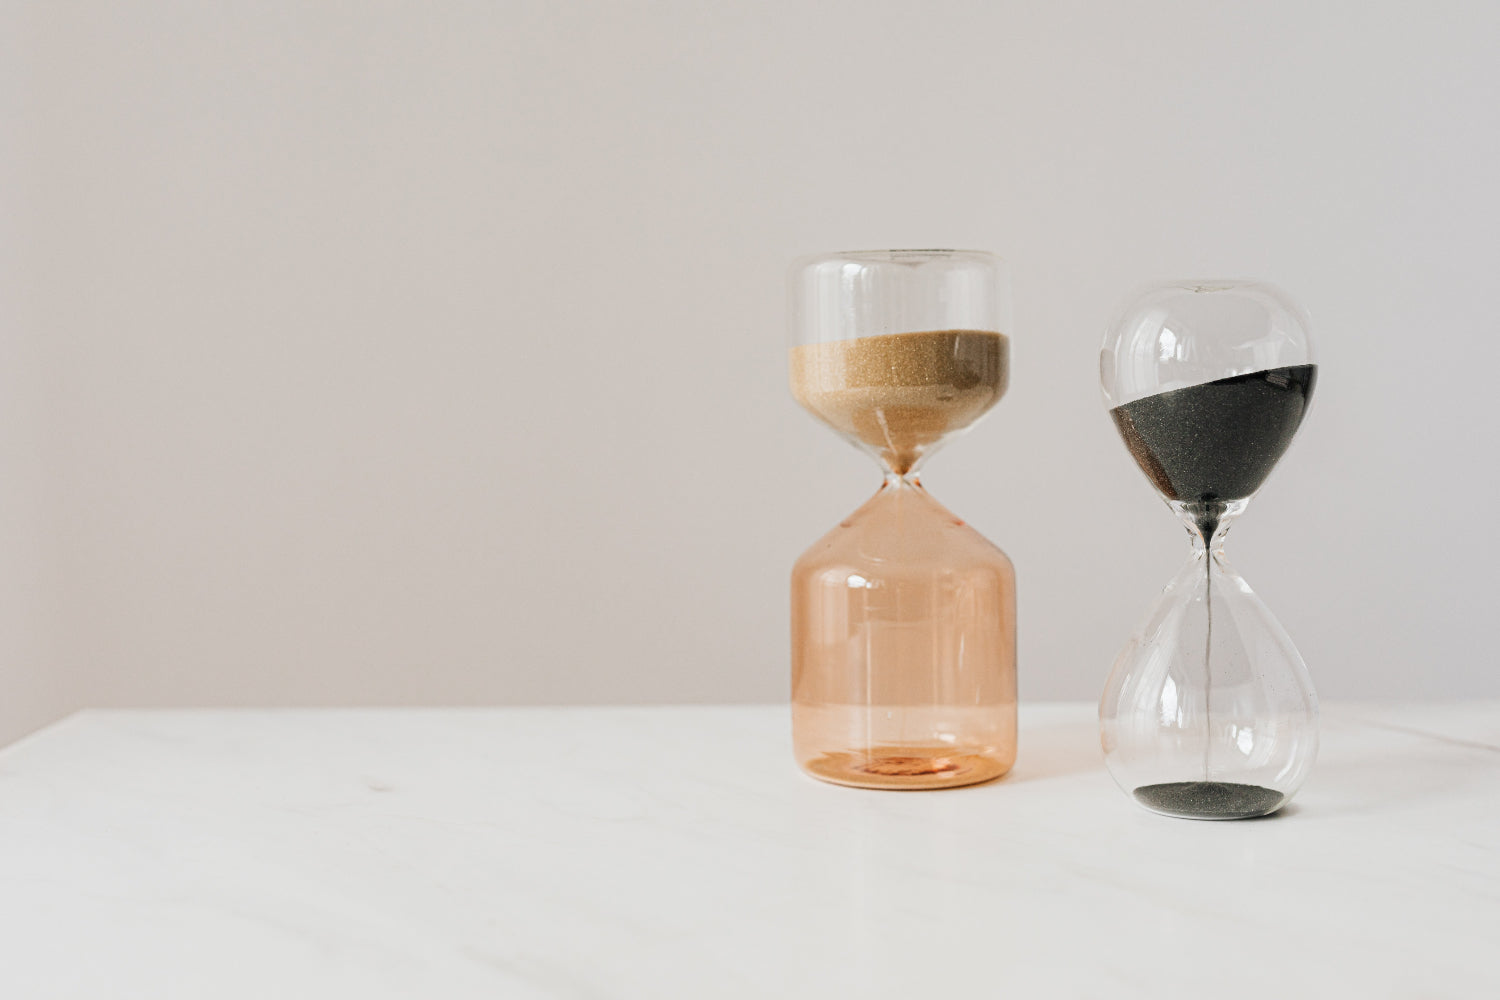 Two glass sand timers grouped against a neutral background